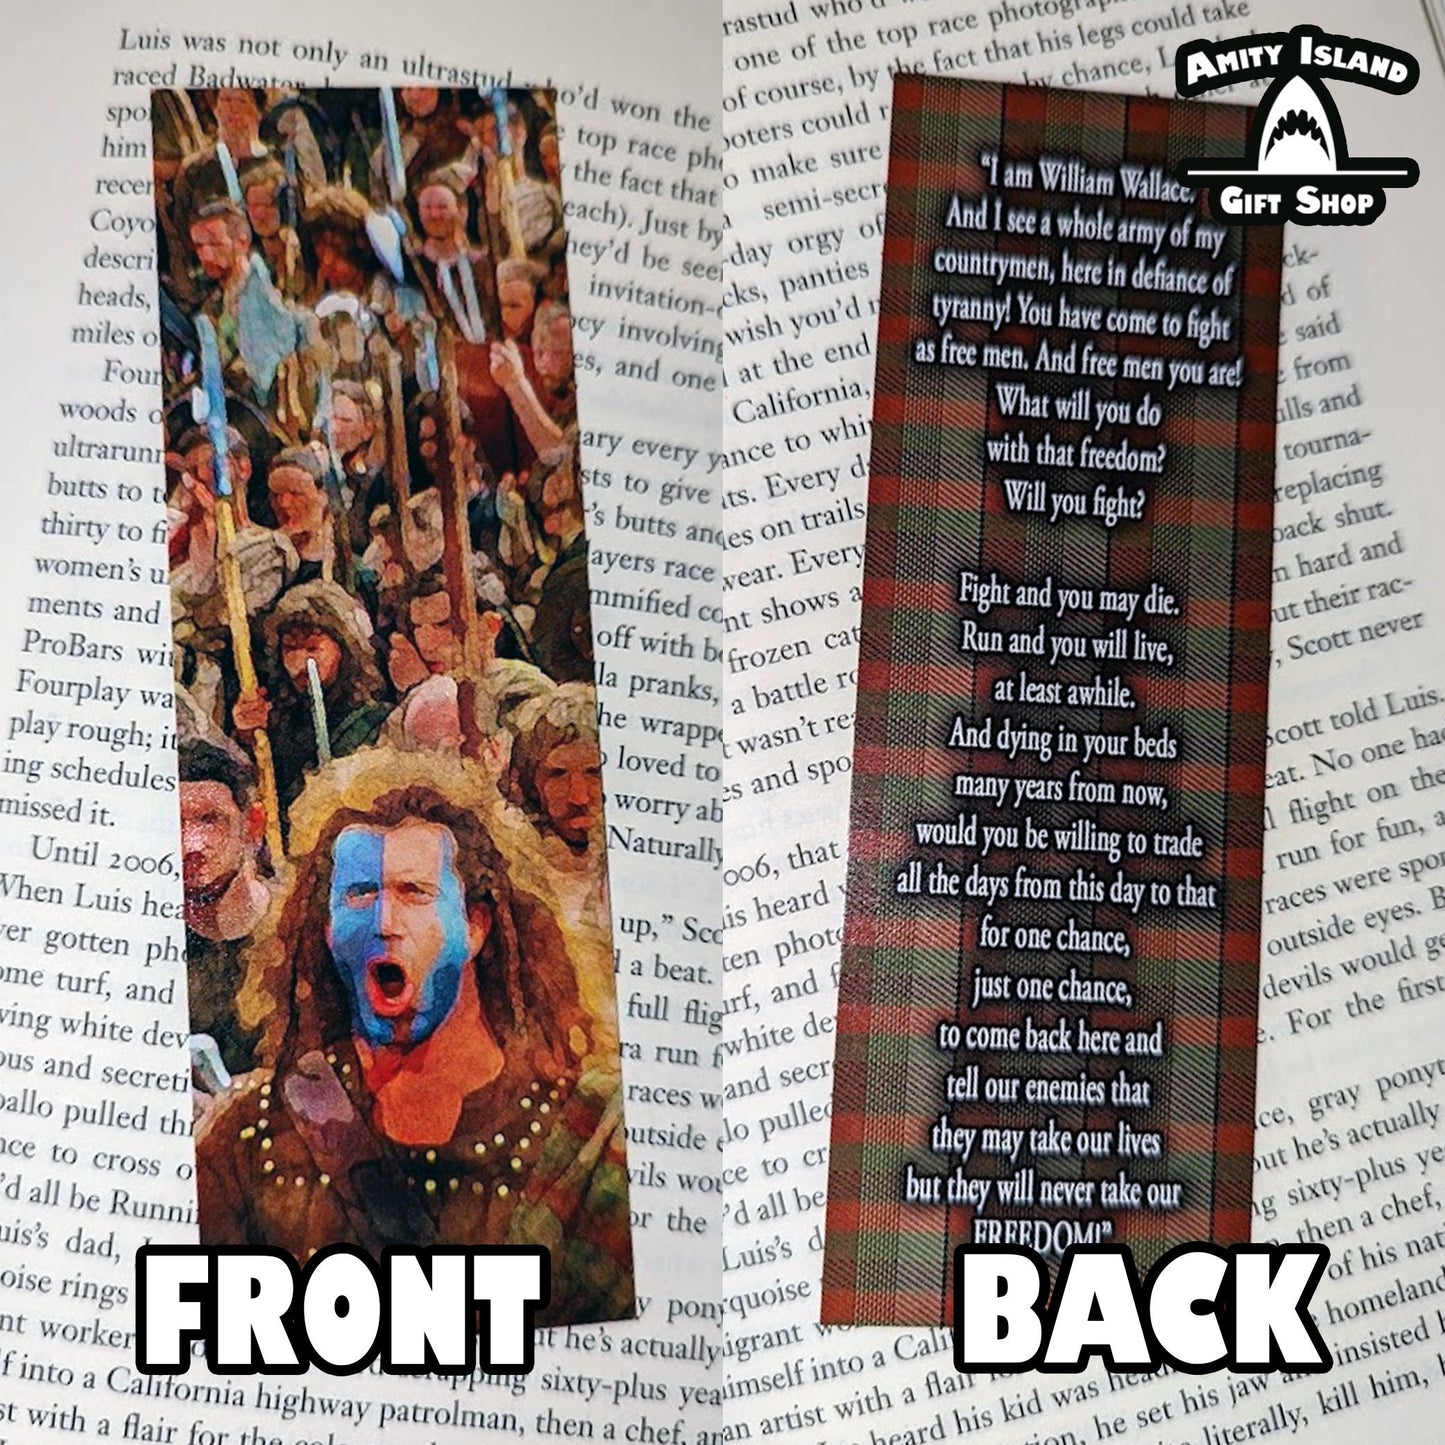 Monologue Marks - "FREEDOM!" from Braveheart